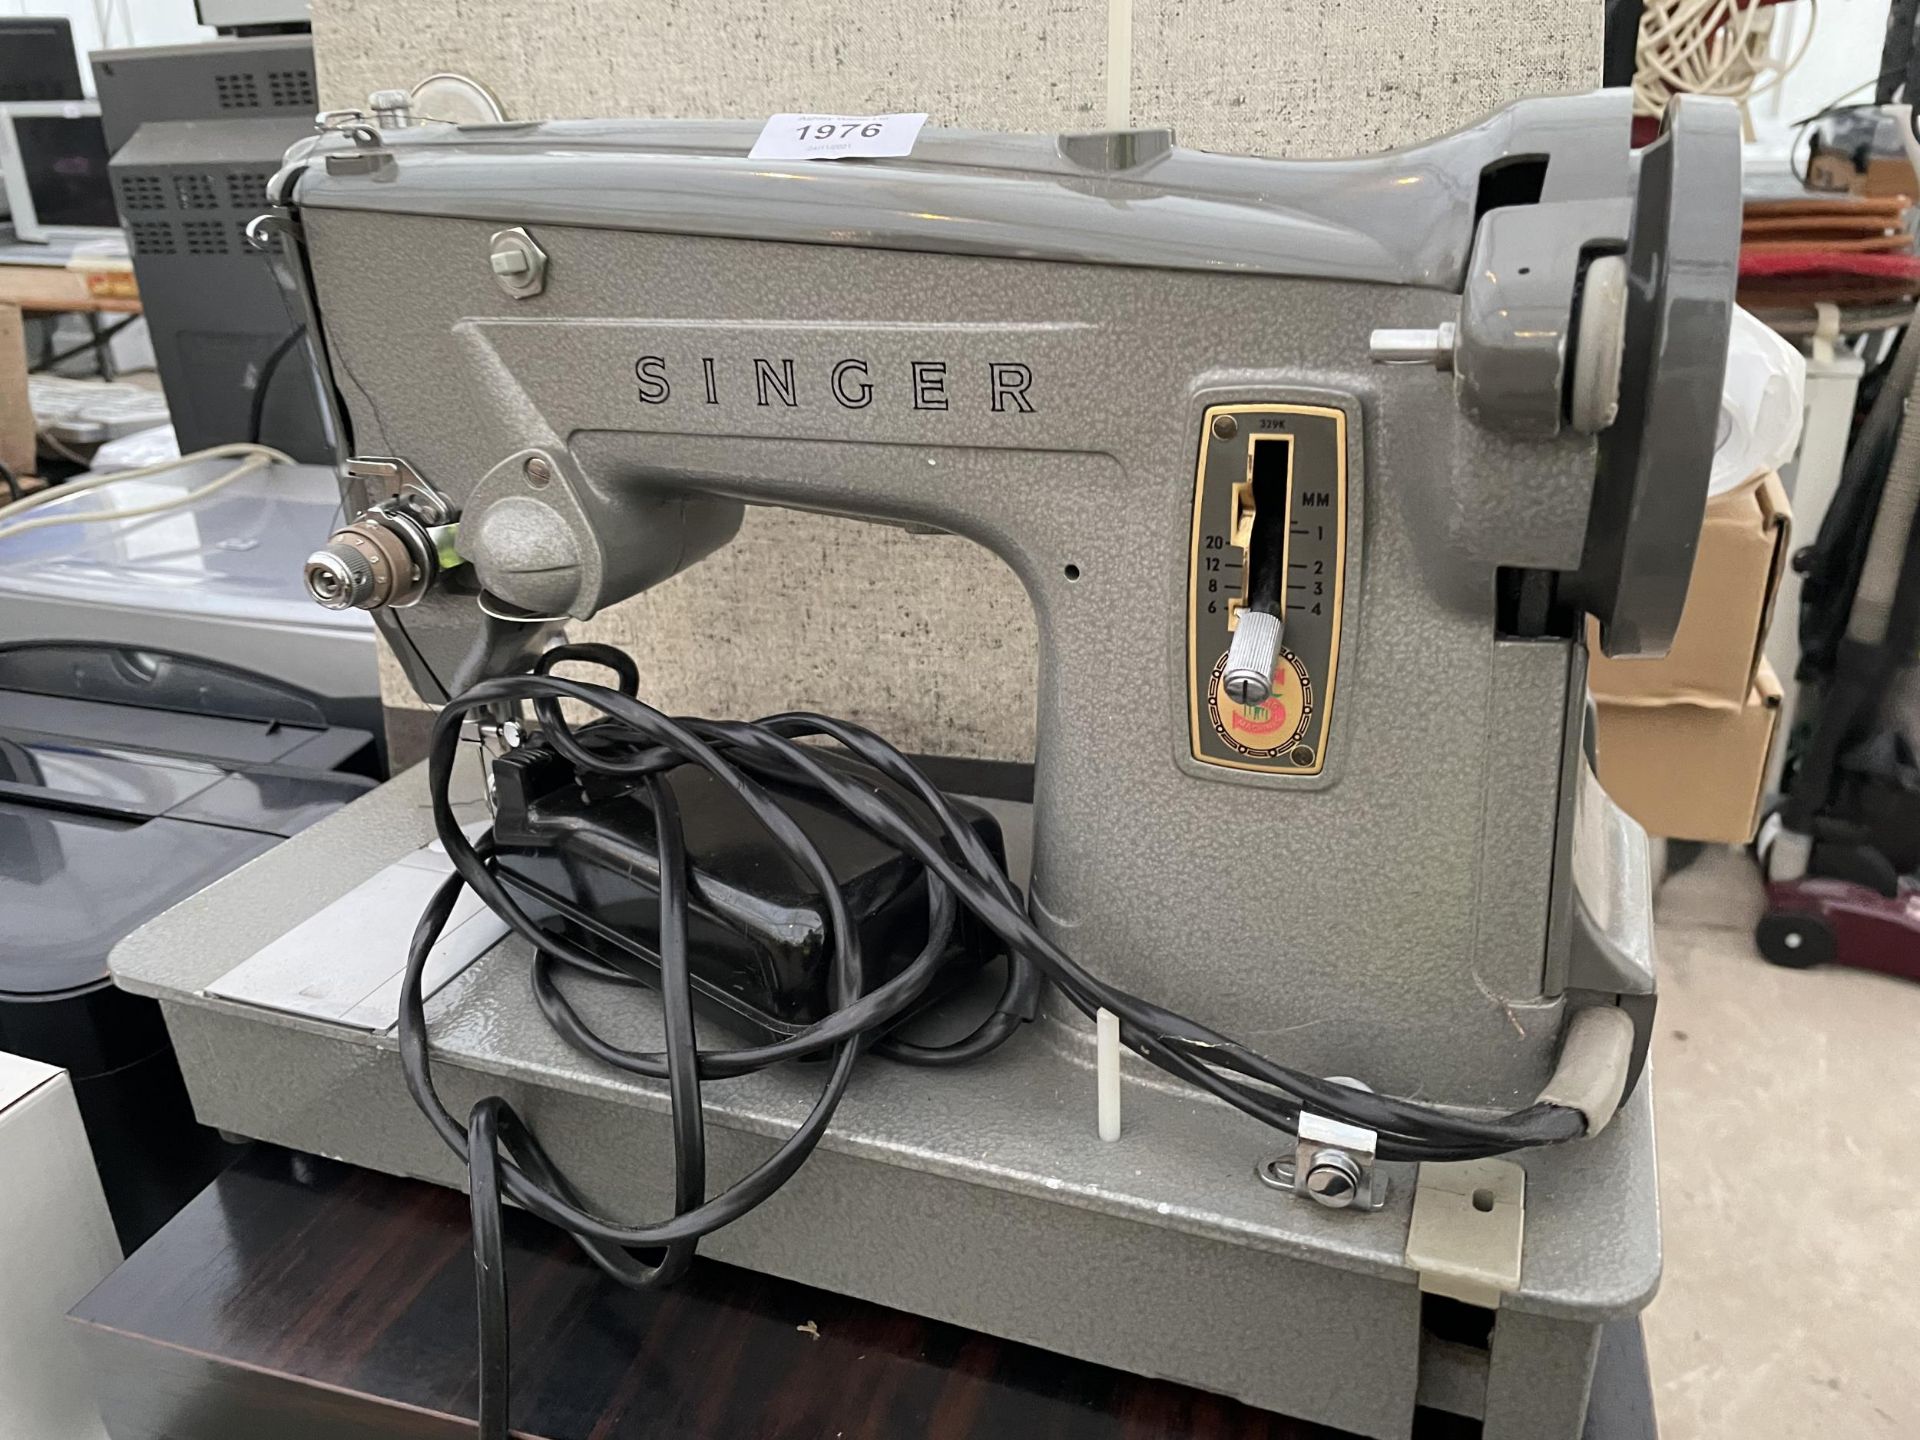 A RETRO SINGER SEWING MACHINE WITH FOOT PEDDLE AND CARRY CASE - Image 2 of 2